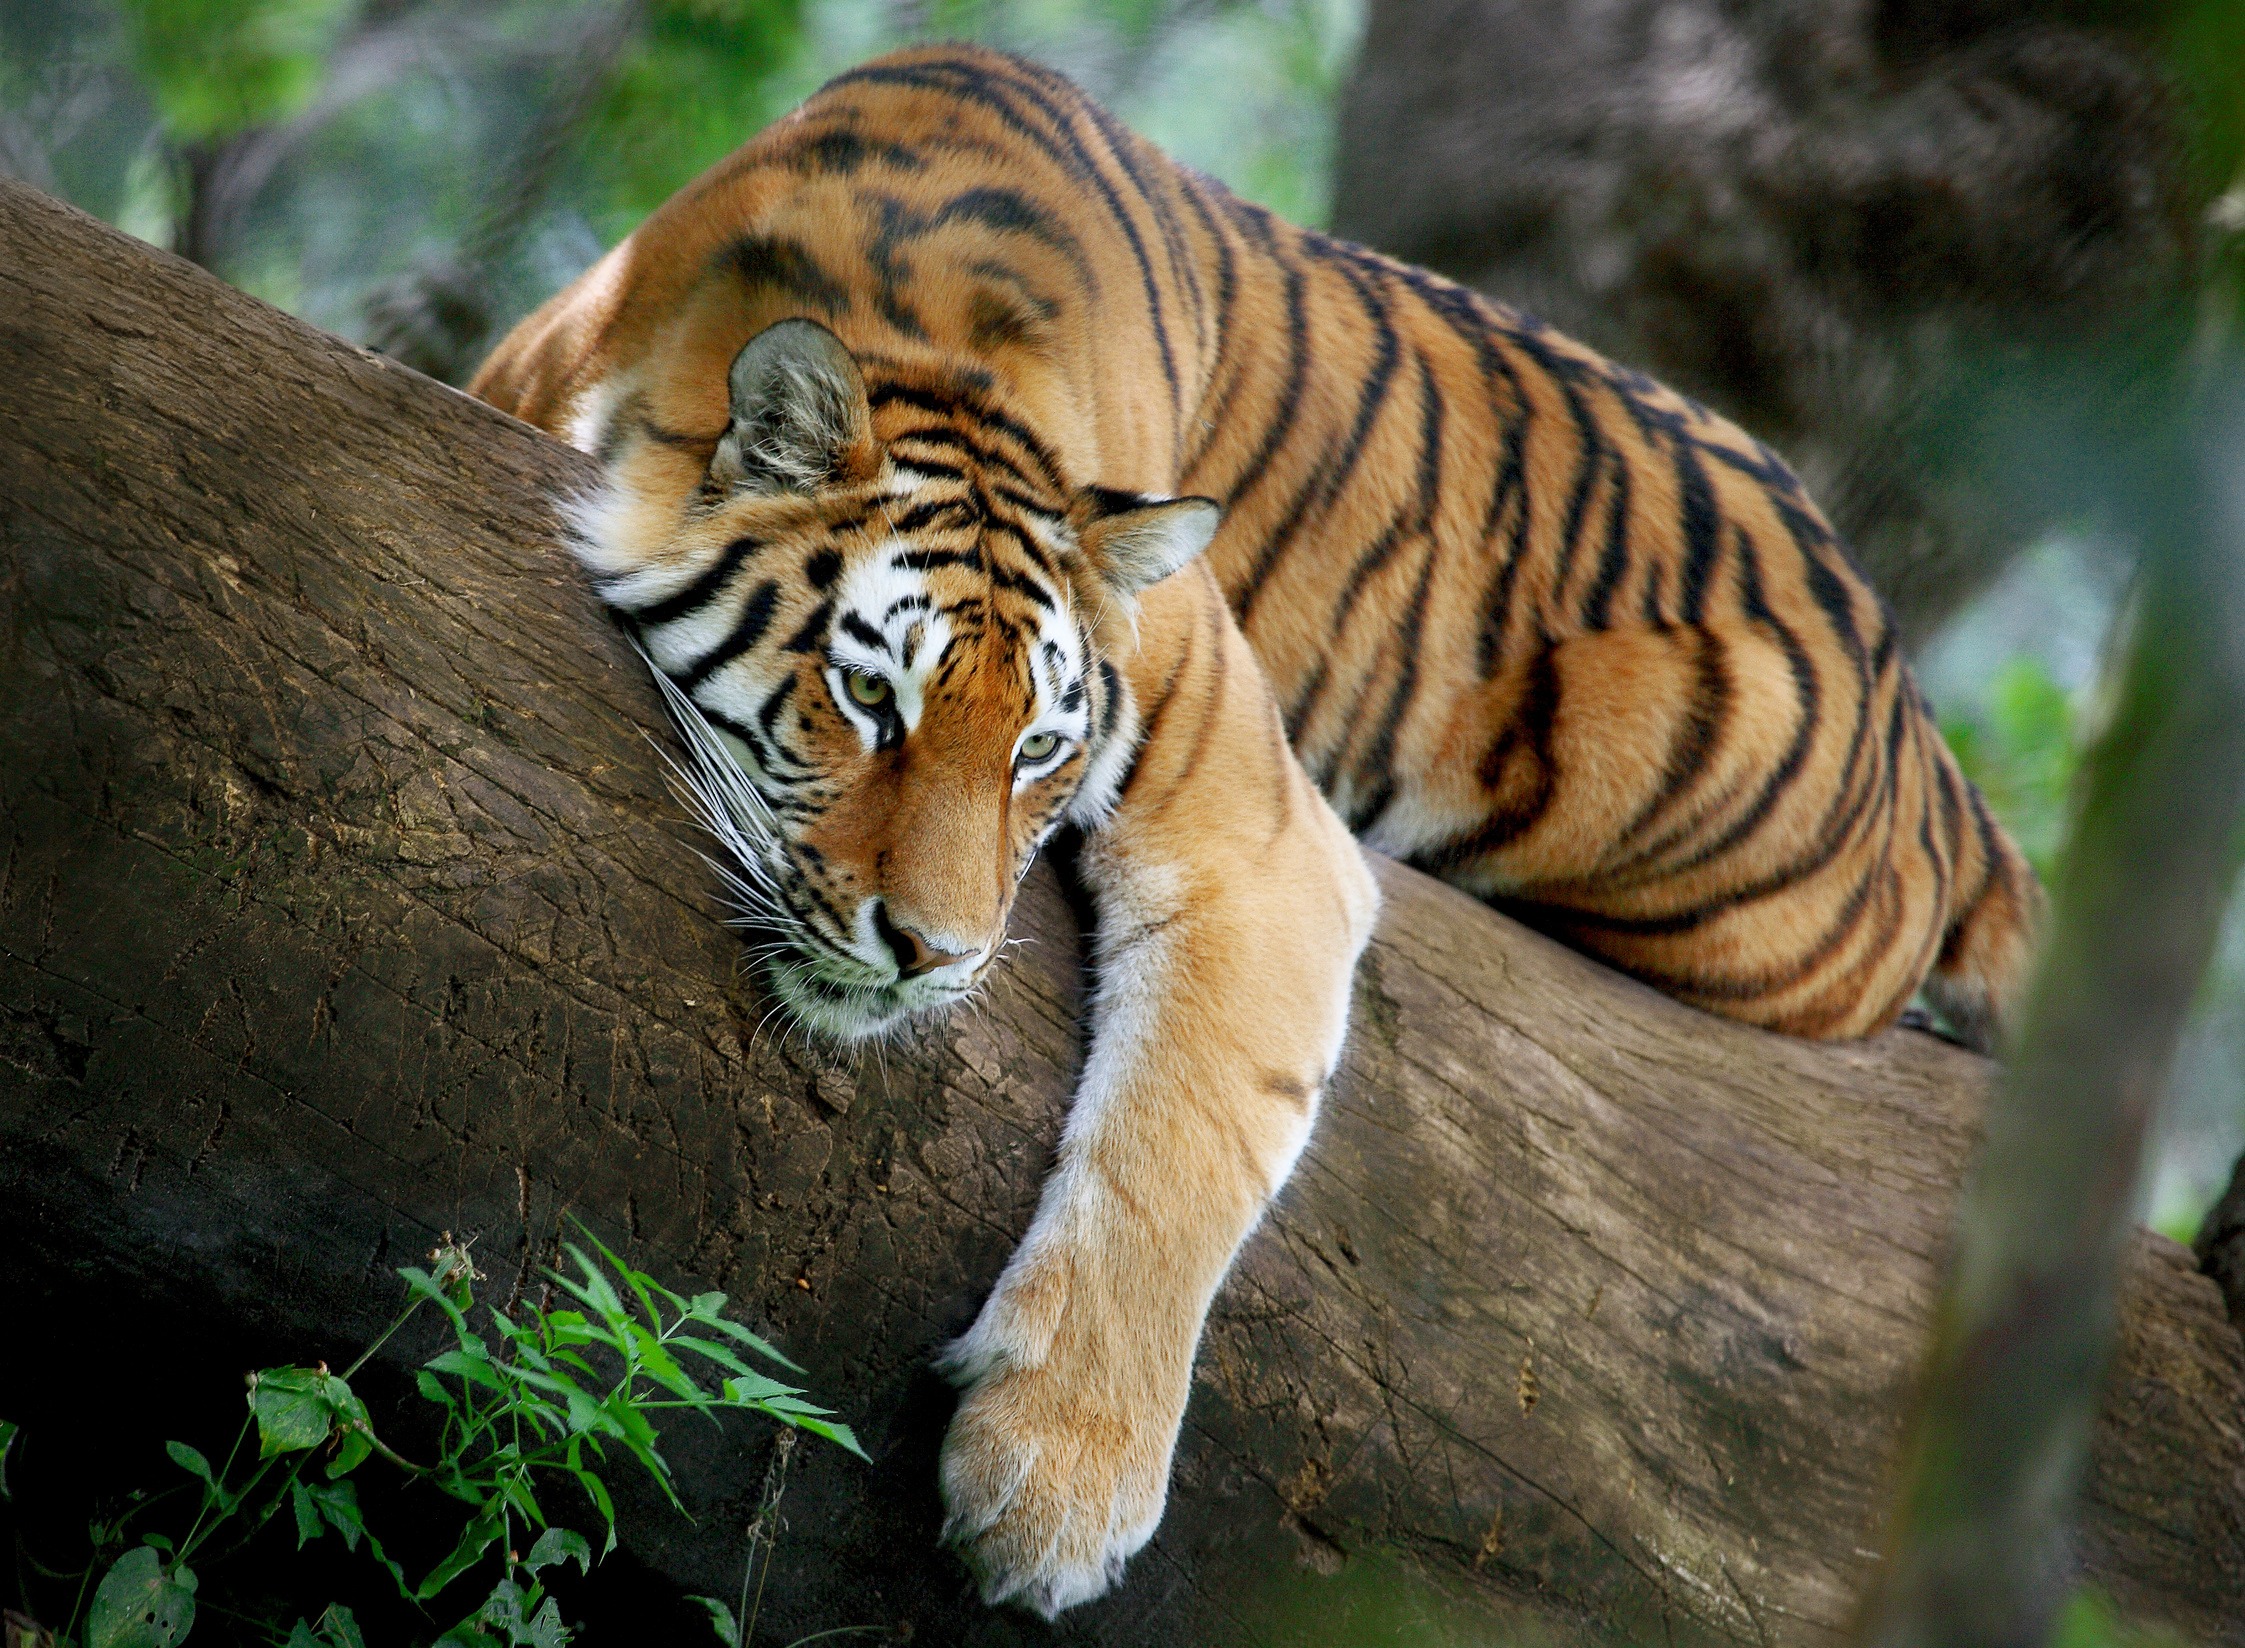 Machli, Charger, Ustad: Why name a tiger, after all?